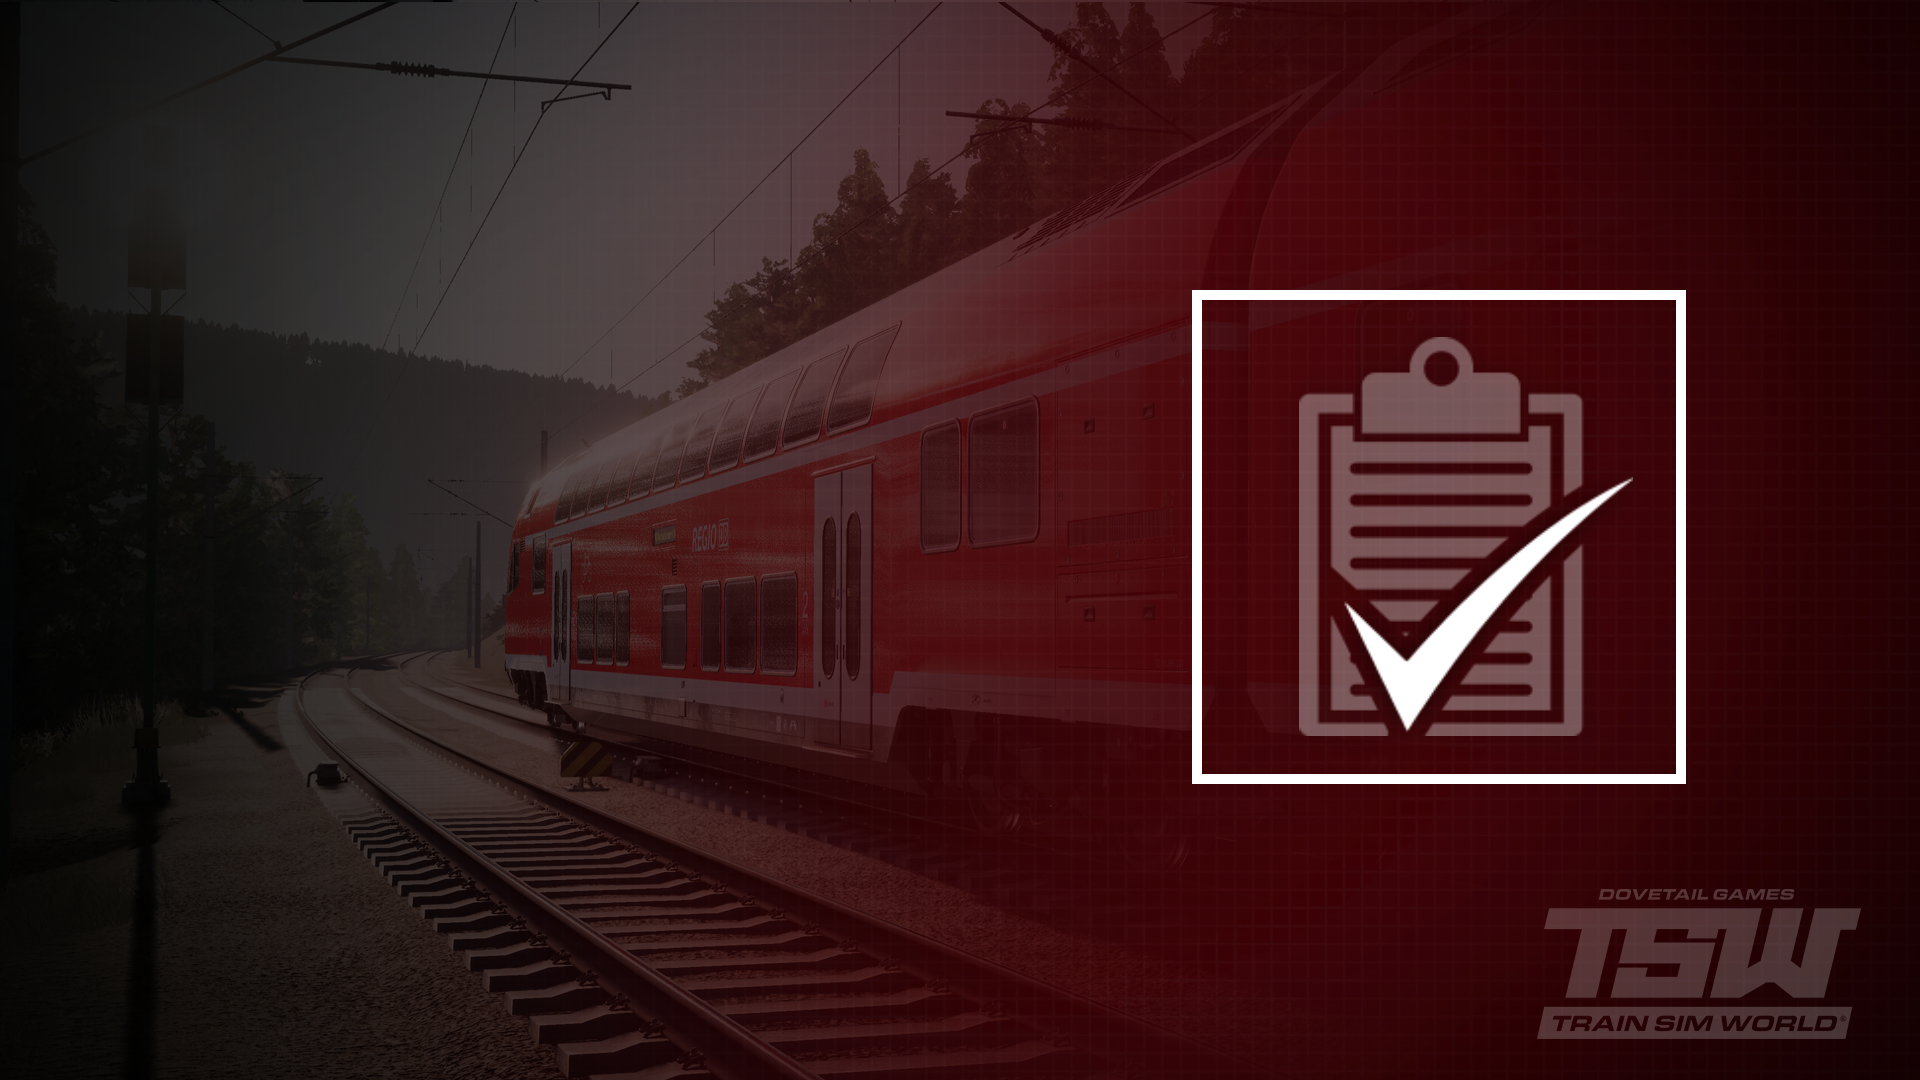 Icon for MSB: Welcome to Main-Spessart Bahn